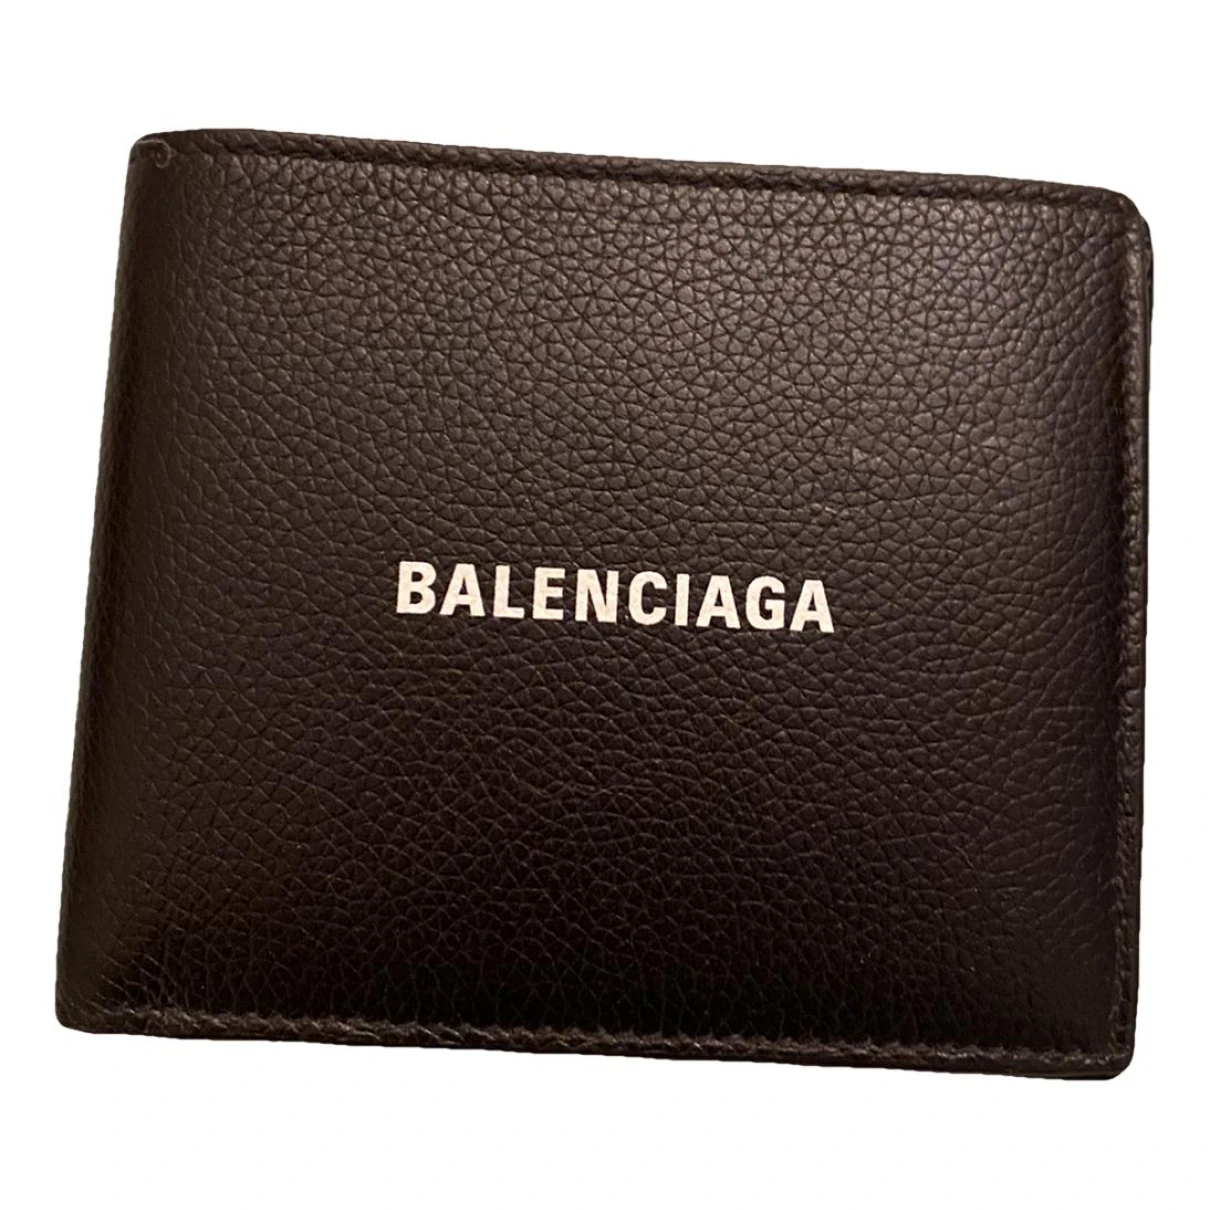 Pre-owned Balenciaga Leather Small Bag In Black